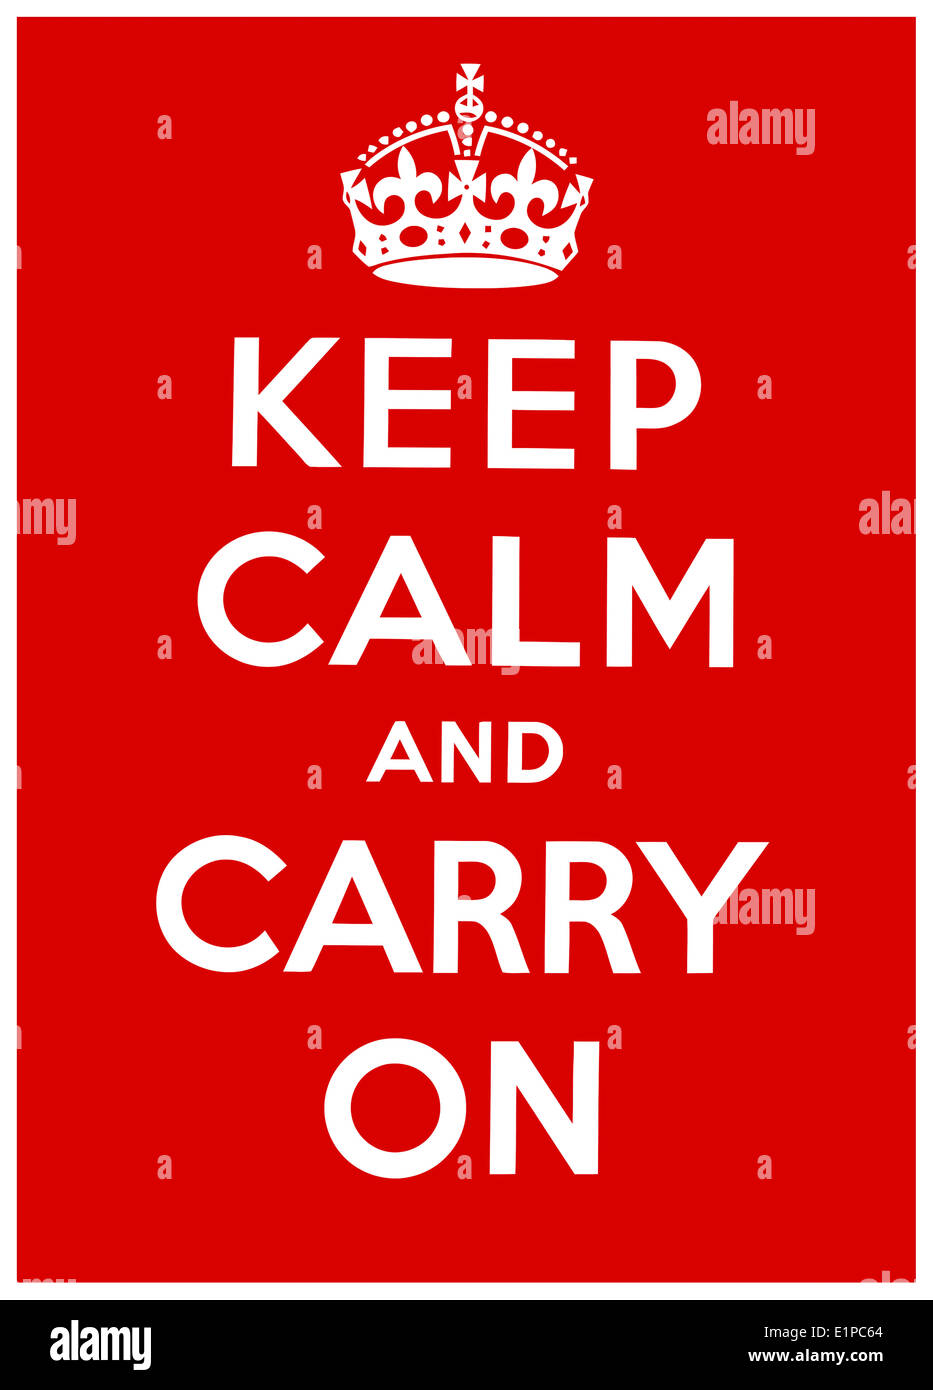 Keep Calm And Carry On A Motivational Propaganda Poster Produced